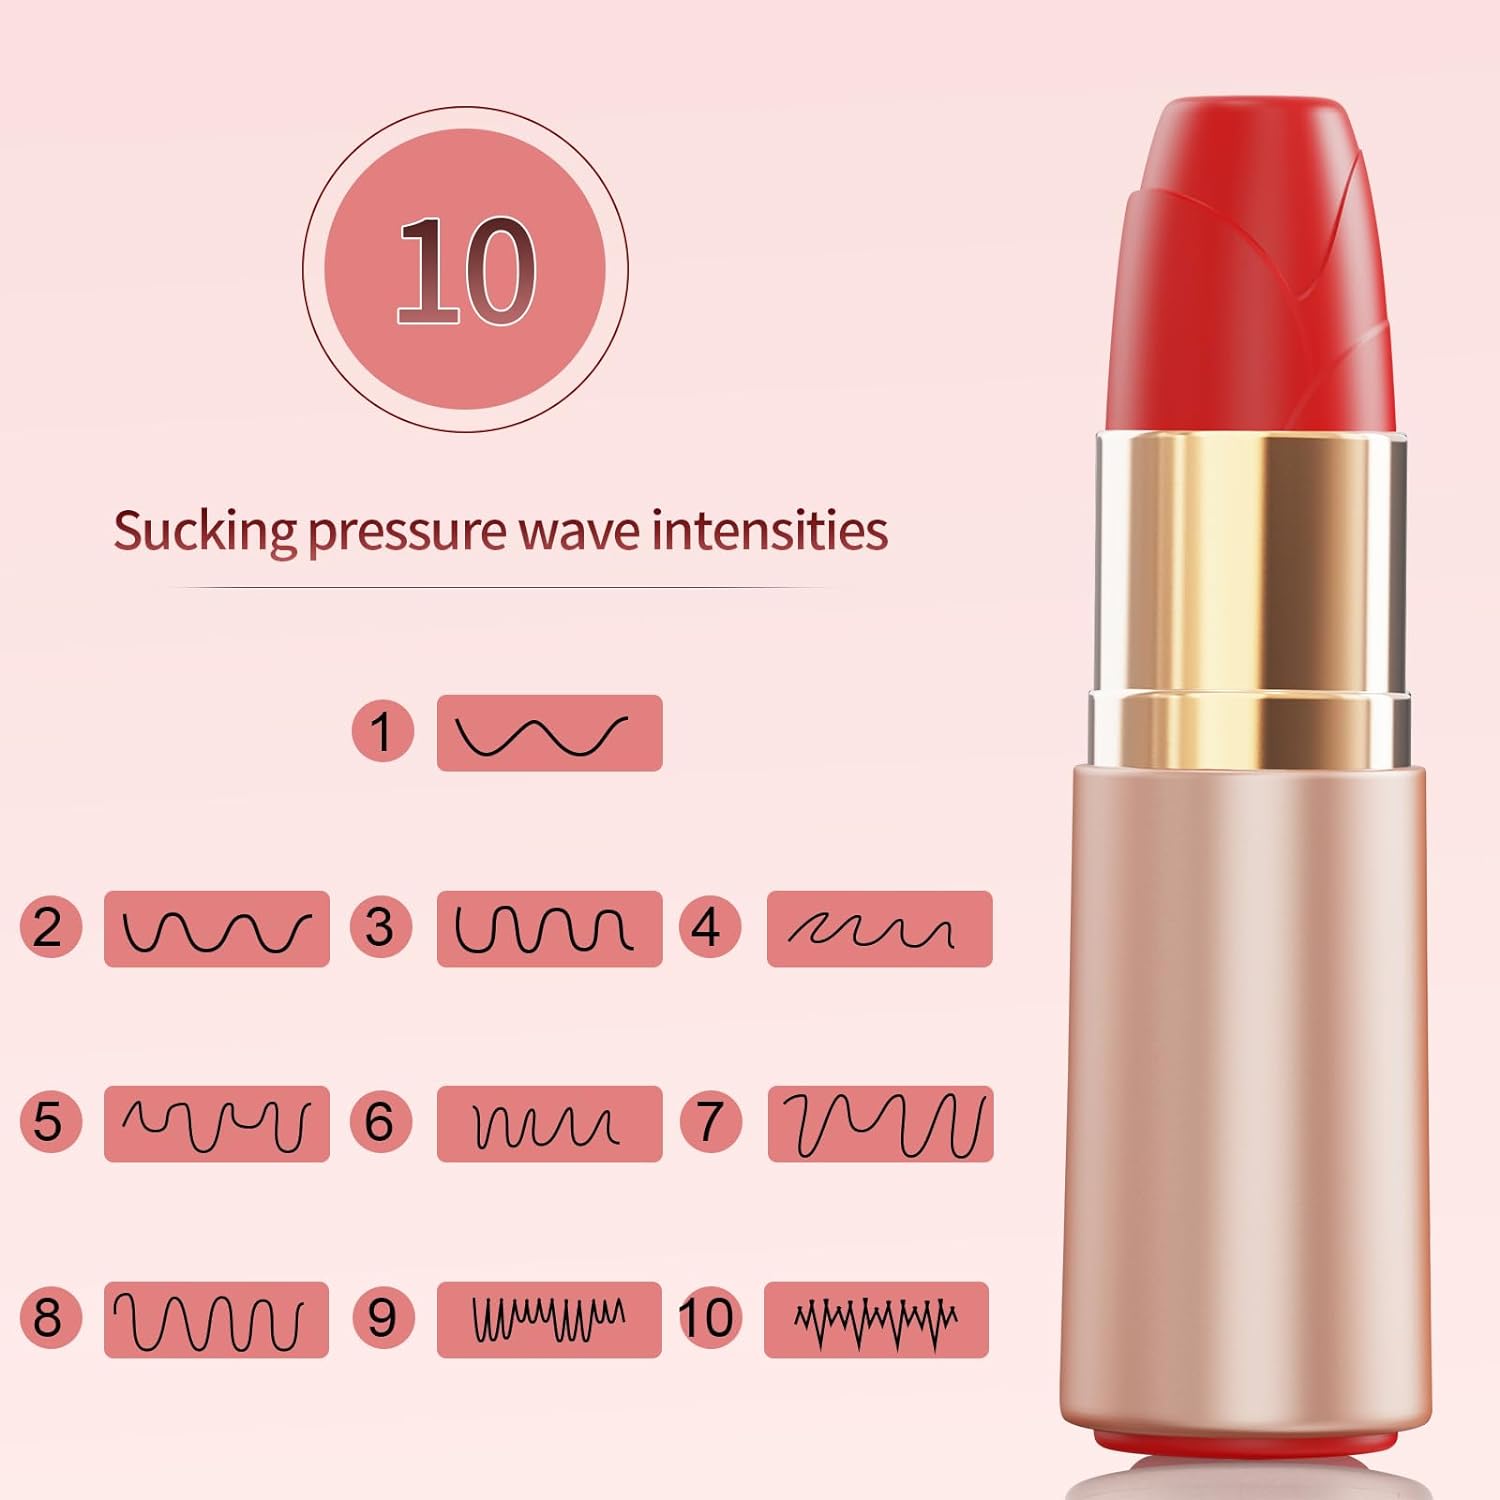 Rose Sex Toy for Women-Clitoral Nipples Lipstick Sucking Vibrator with 10 Suction and Vibration Patterns, Adult Sex Toys for Women and Couples